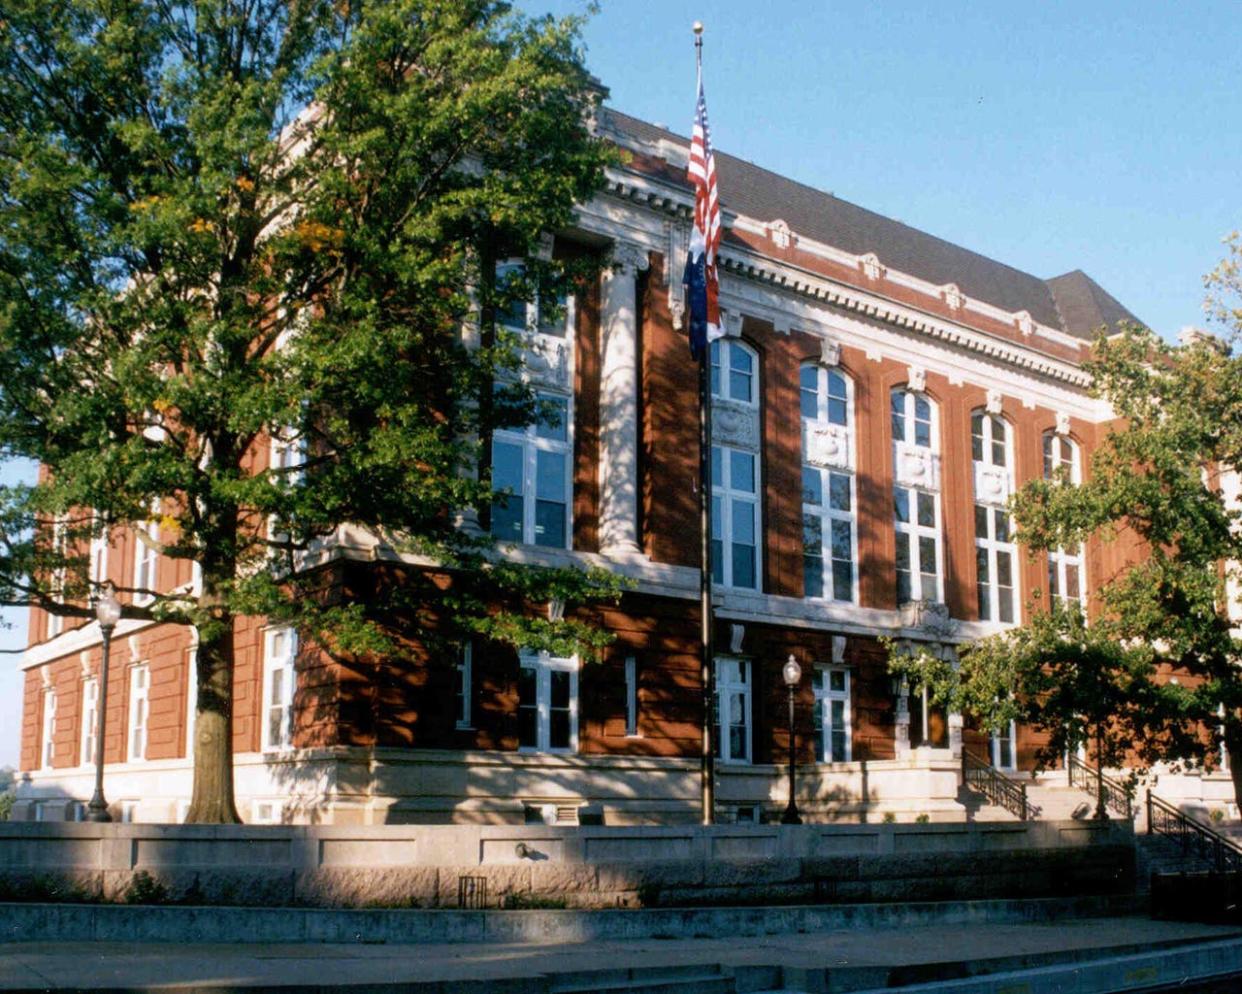 The Missouri Supreme Court building in Jefferson City, which houses the office of the Missouri Attorney General.